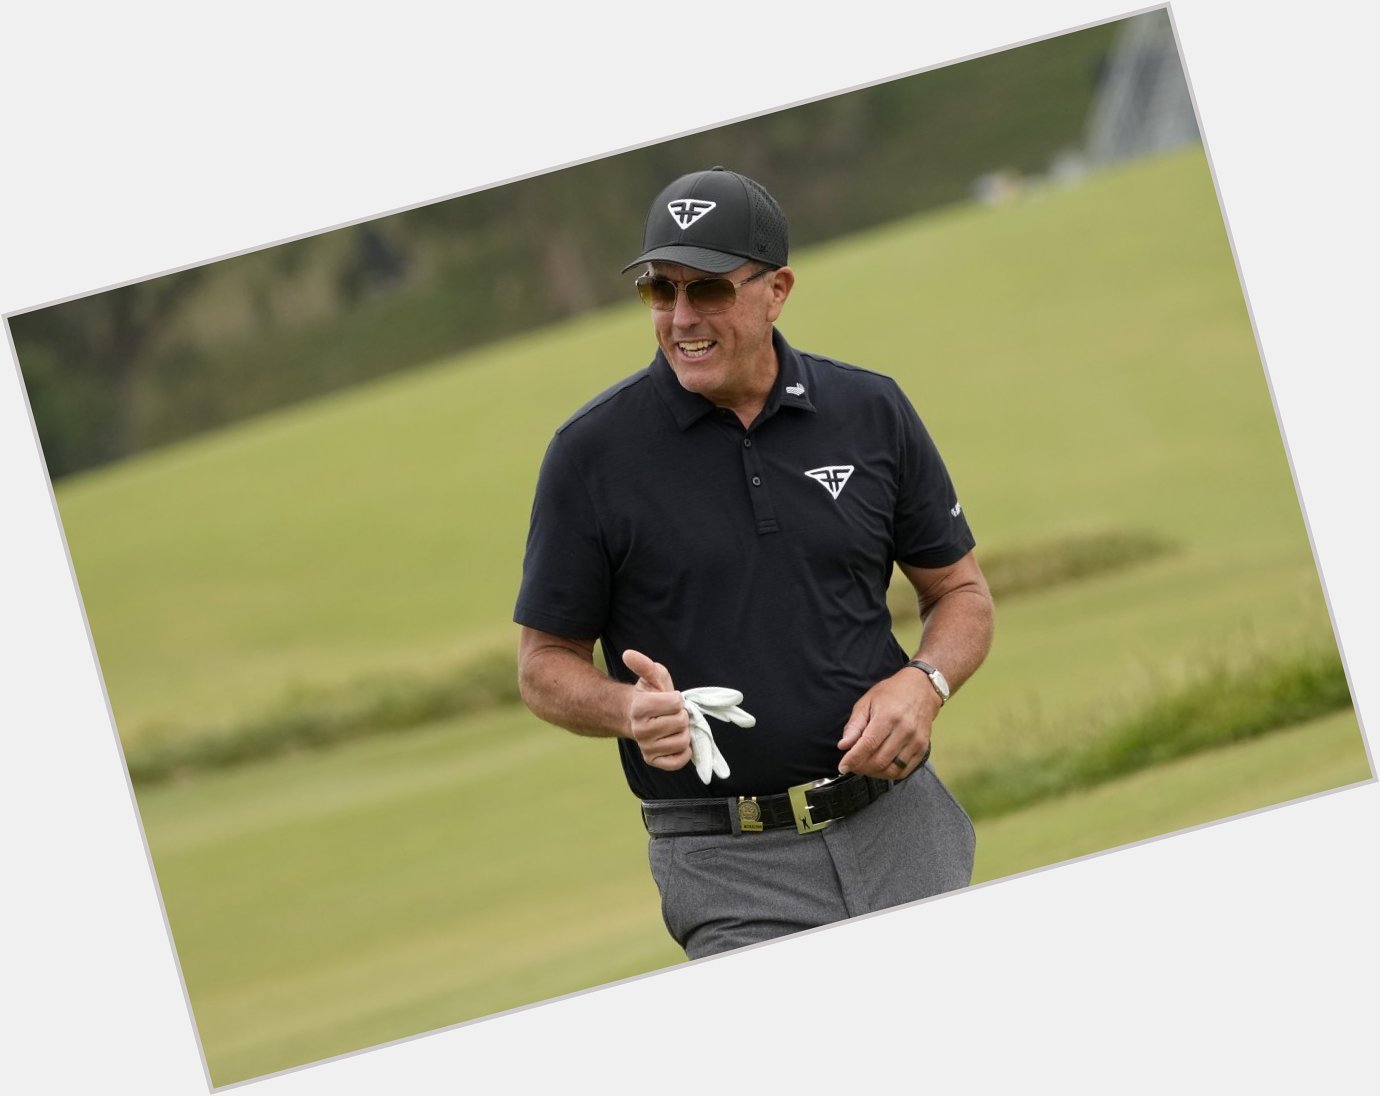 Happy 53rd Birthday Phil Mickelson! 

He\s 150 to 1 to complete the career slam this weekend 